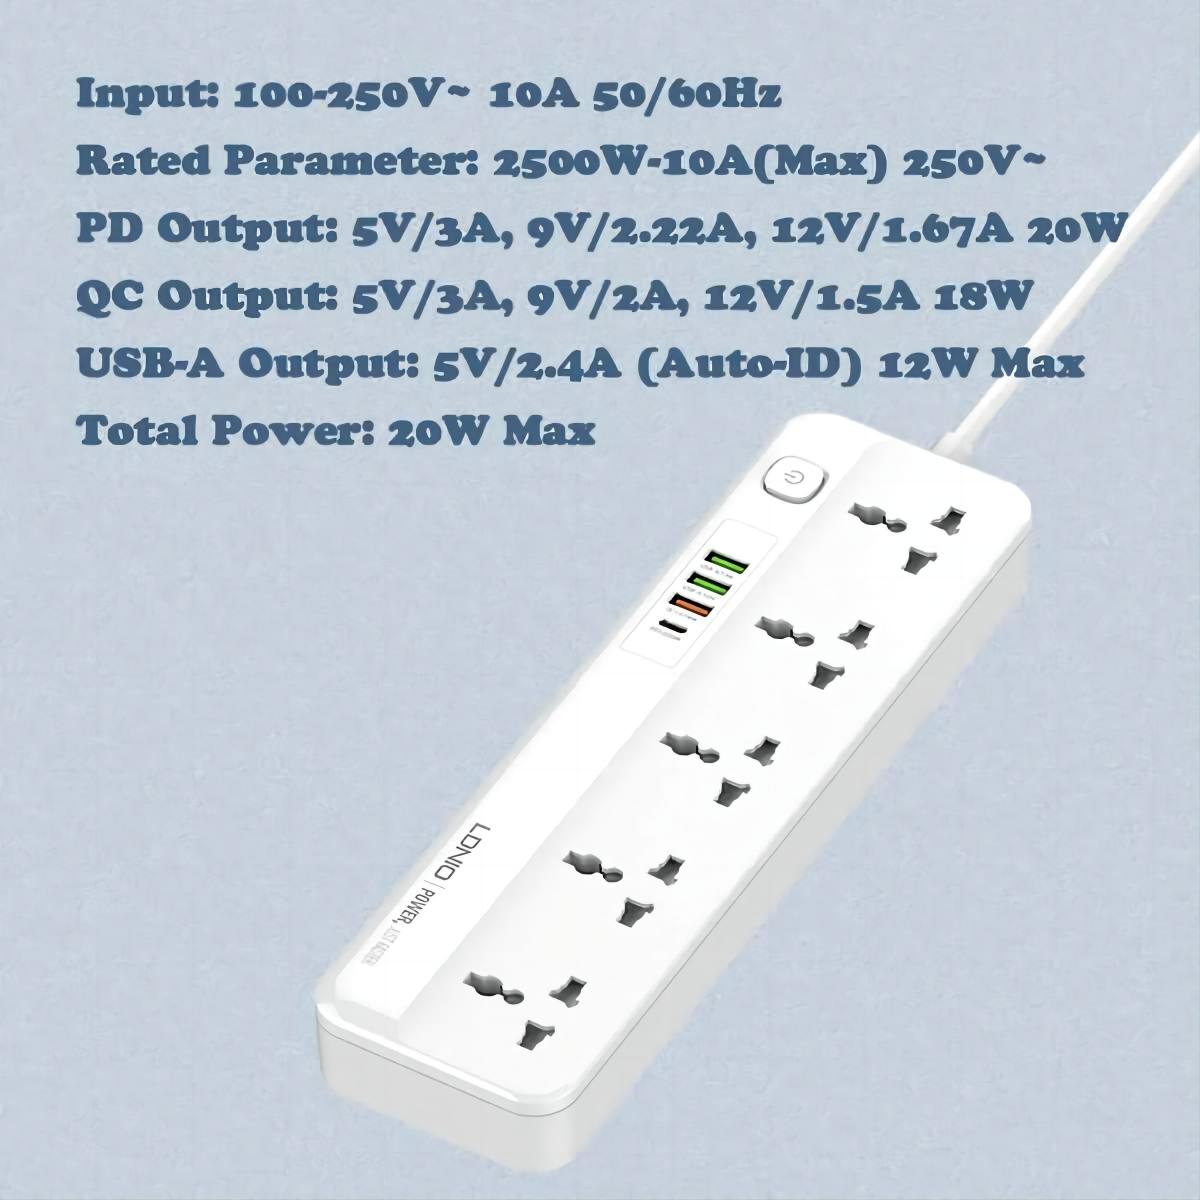 LDNIO 5 AC Outlets Universal Power Strip SC5415 - Hugmie